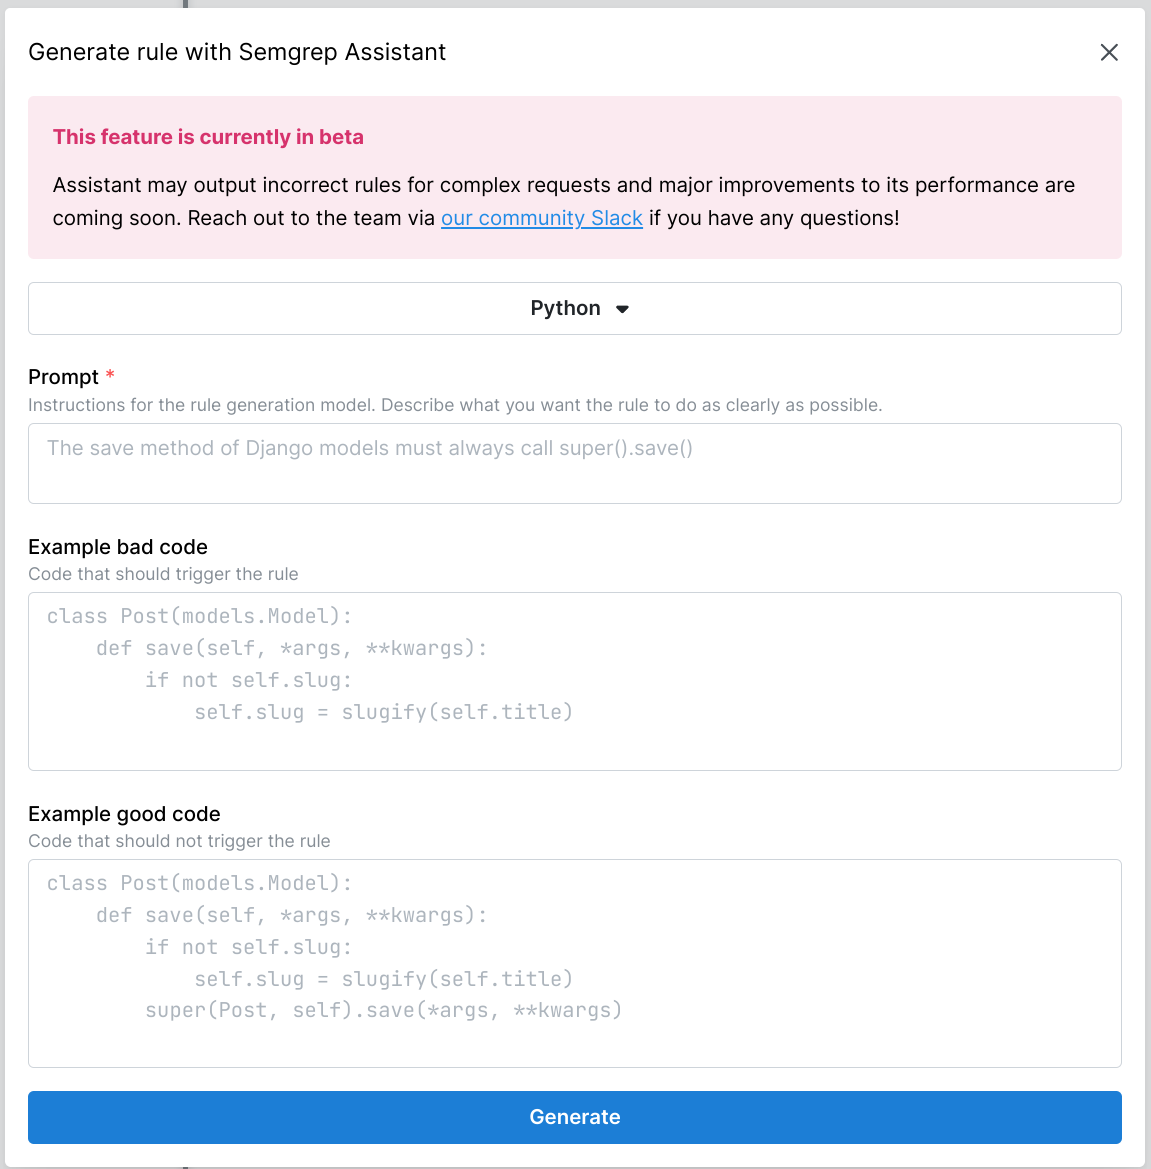 Generate rule with Semgrep Assistant form